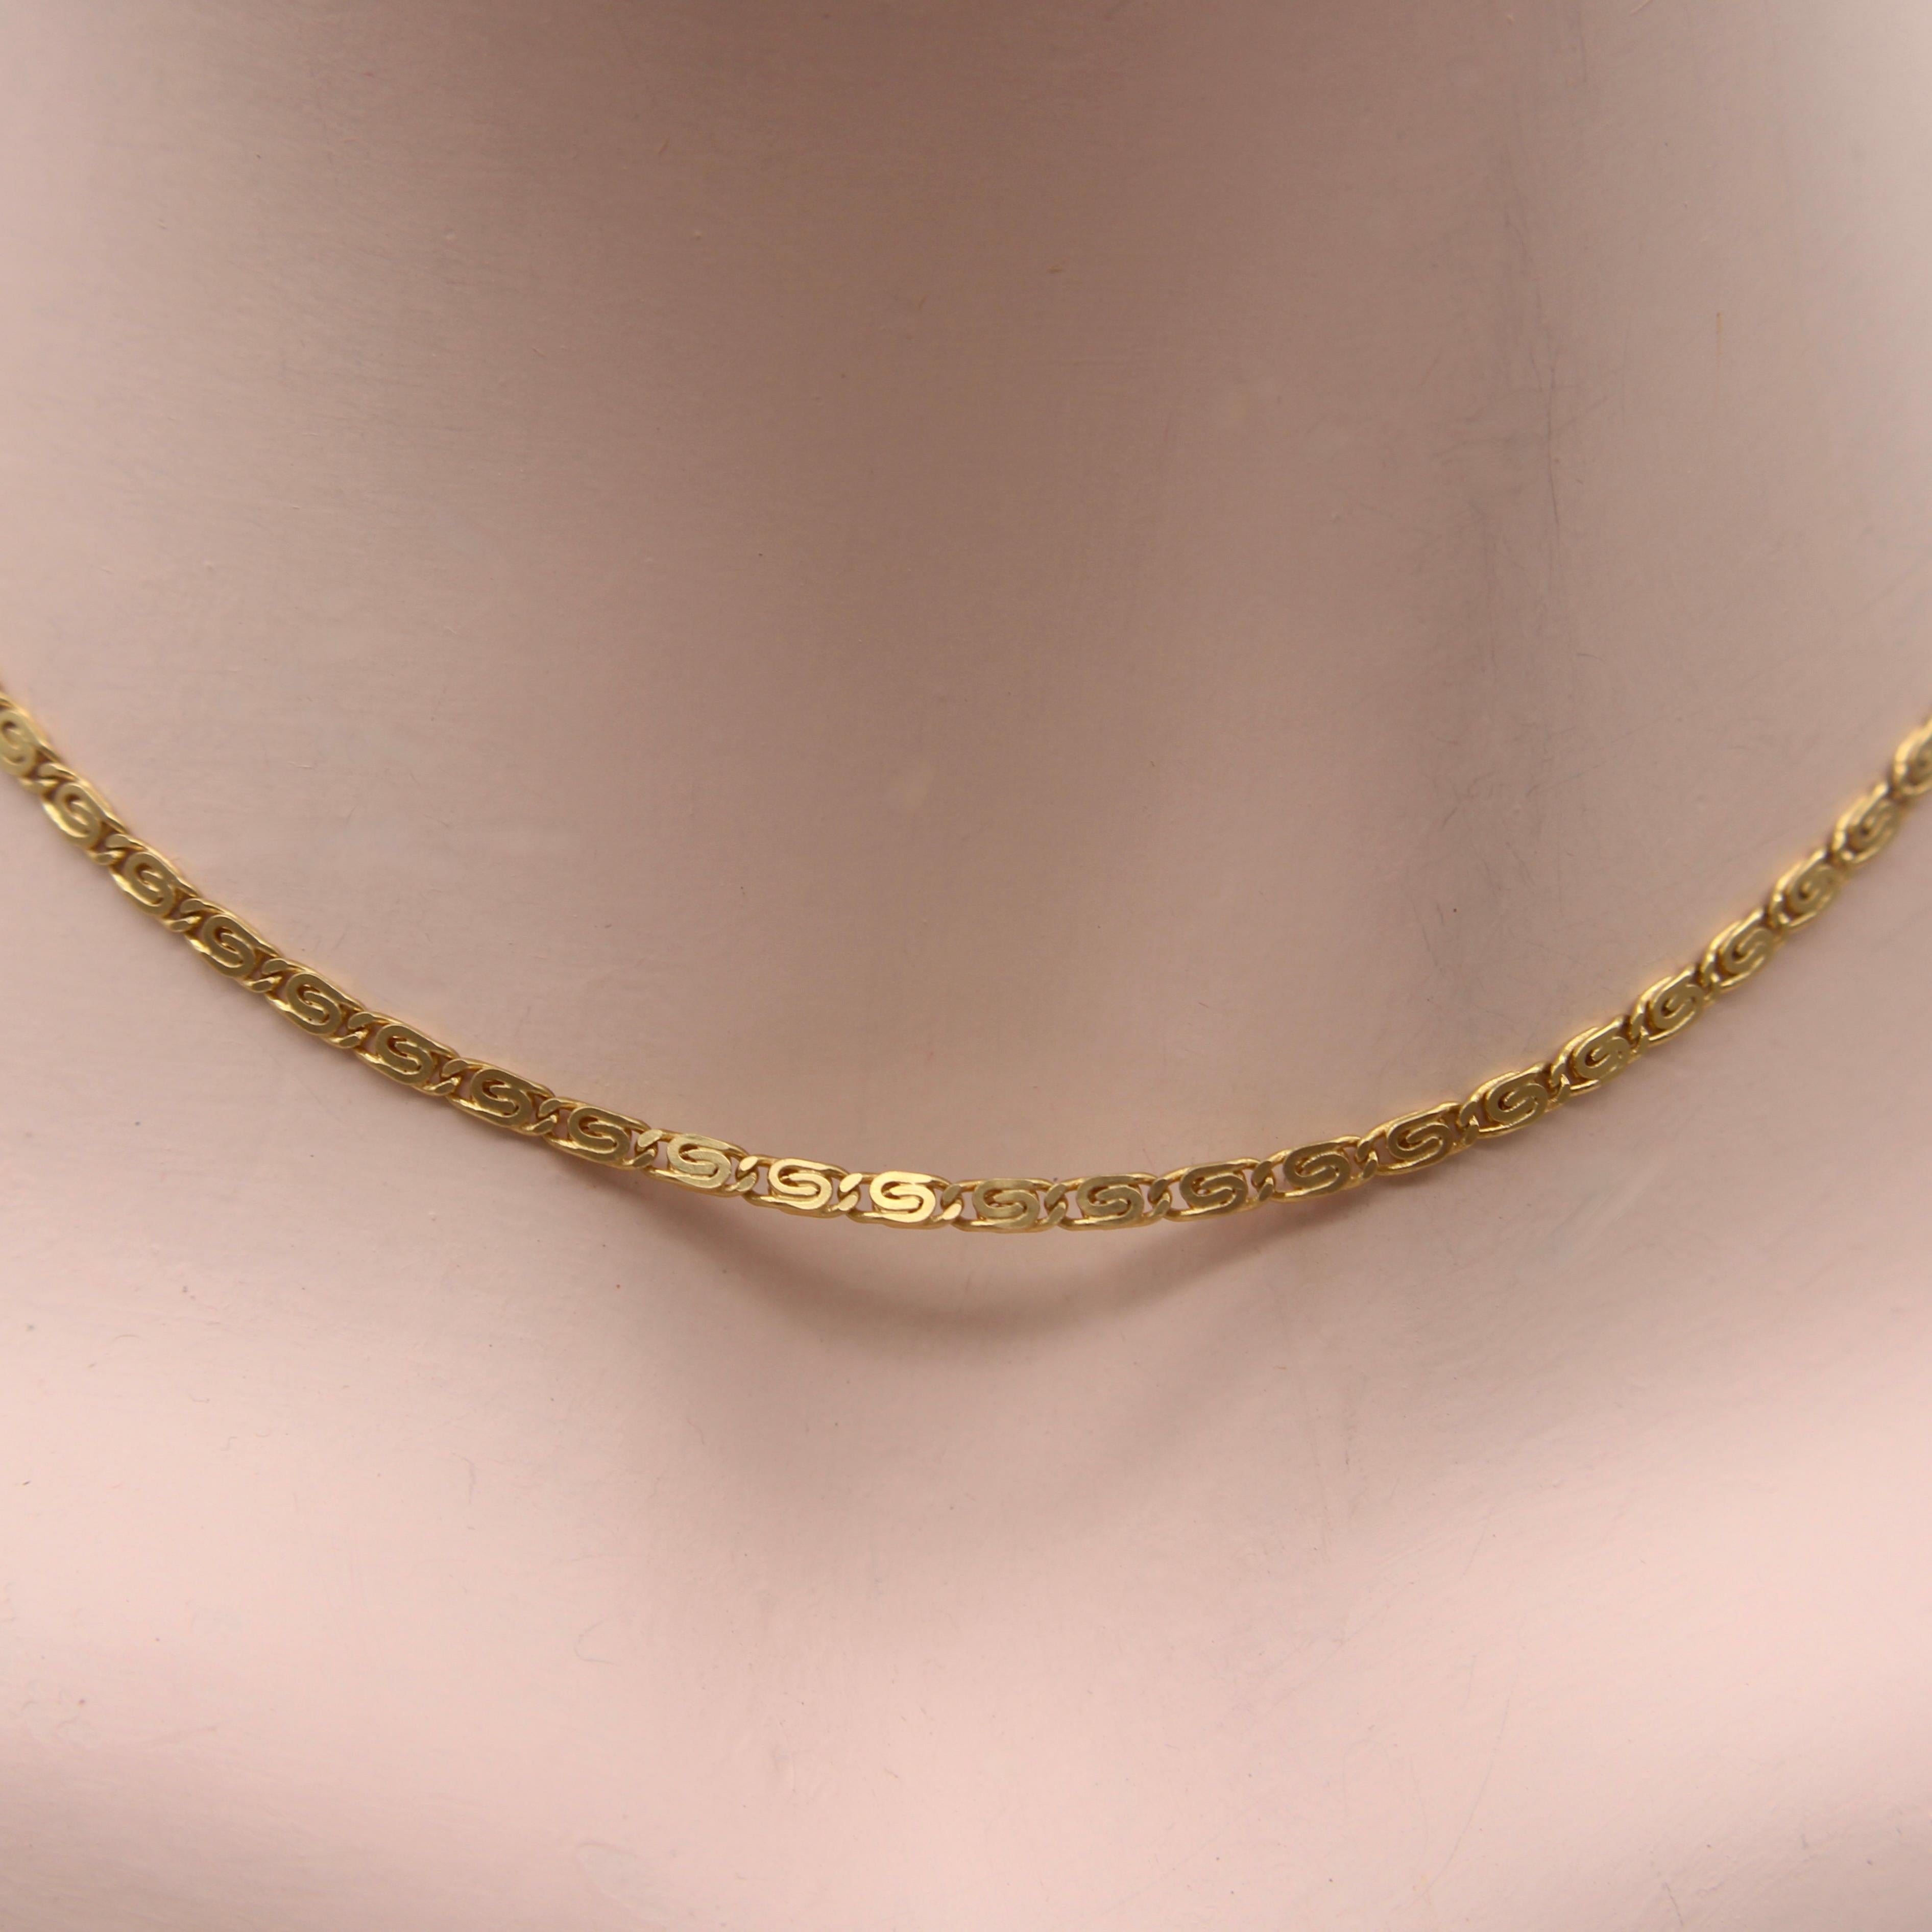 Vintage 18K Gold Italian Flattened Byzantine Link Chain In Good Condition For Sale In Venice, CA